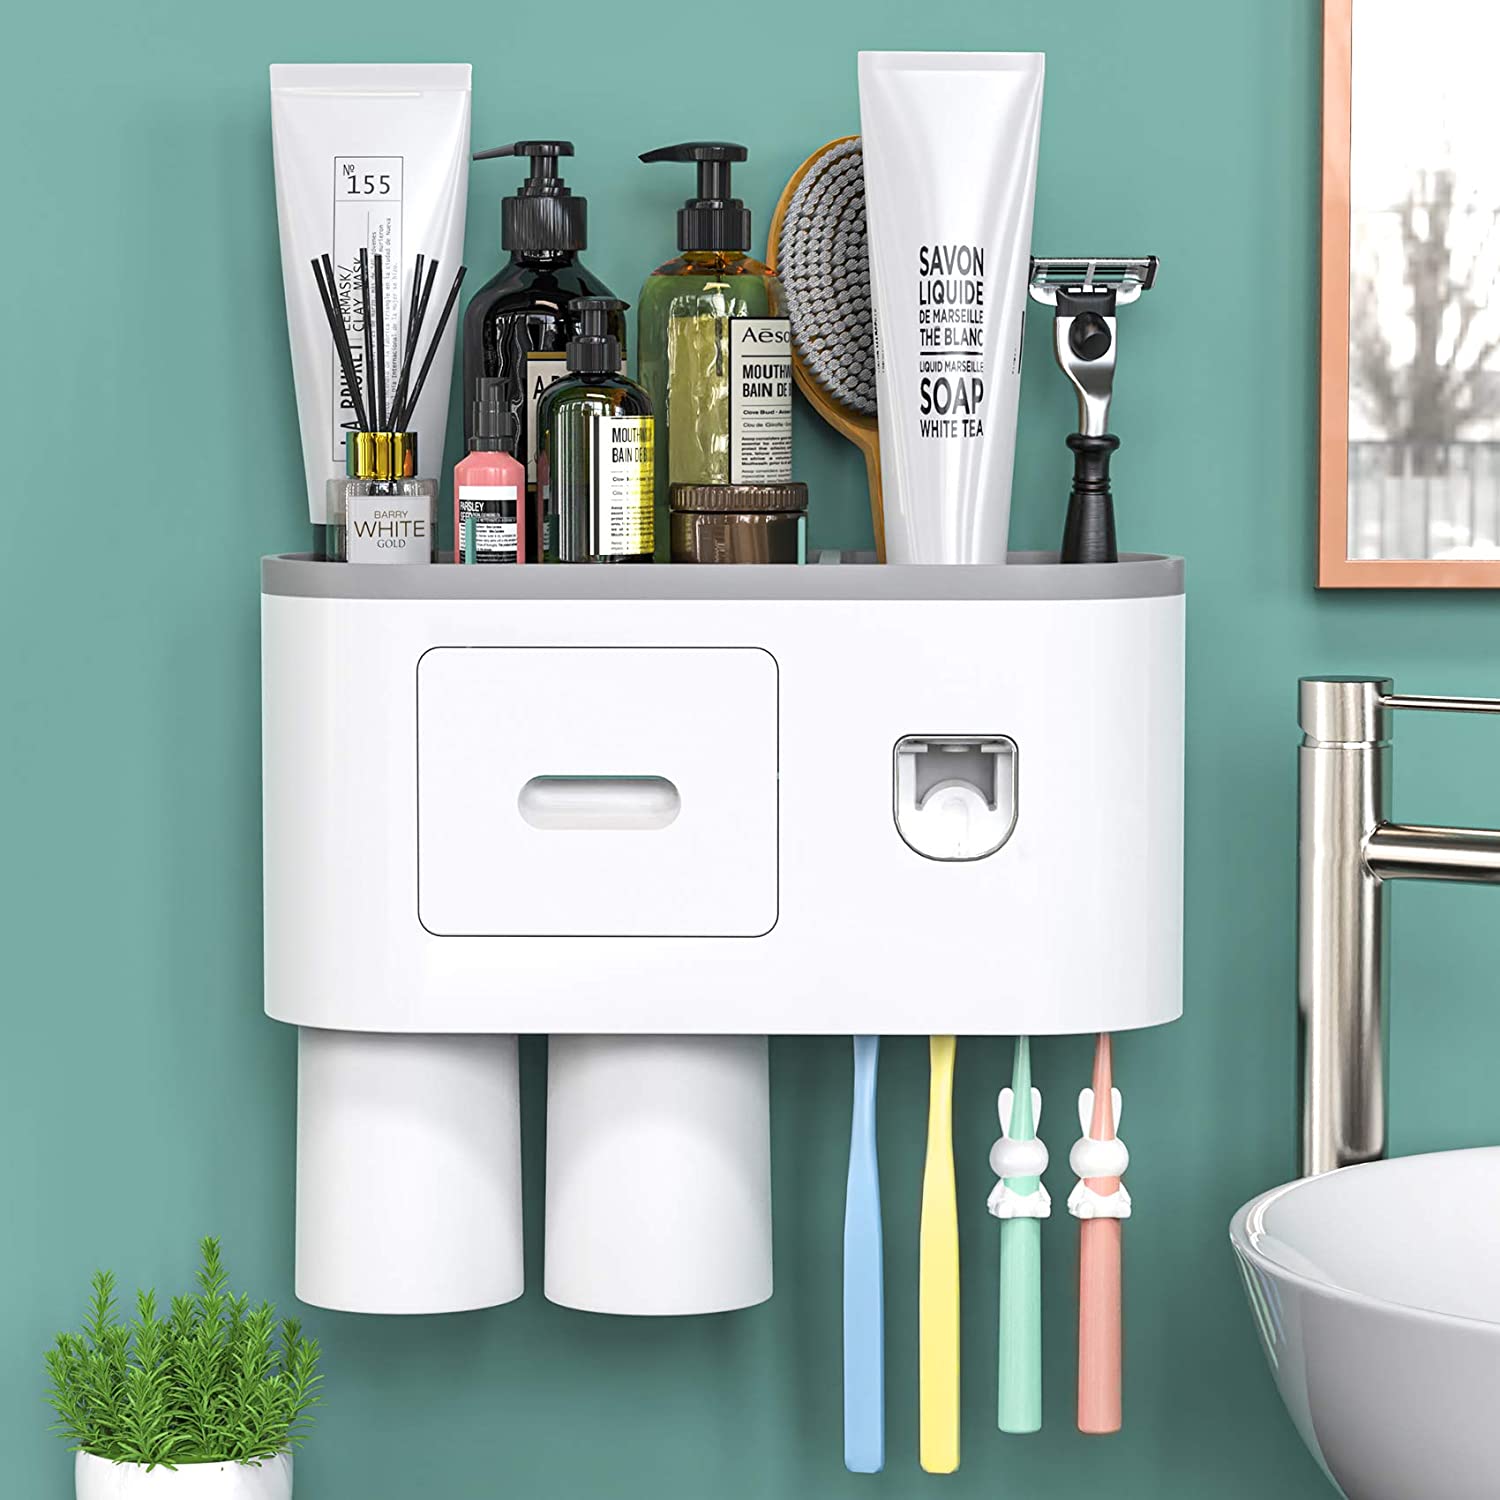 Make The Most Of Every Space With These Savvy Bathroom Storage Ideas -  Décor Aid